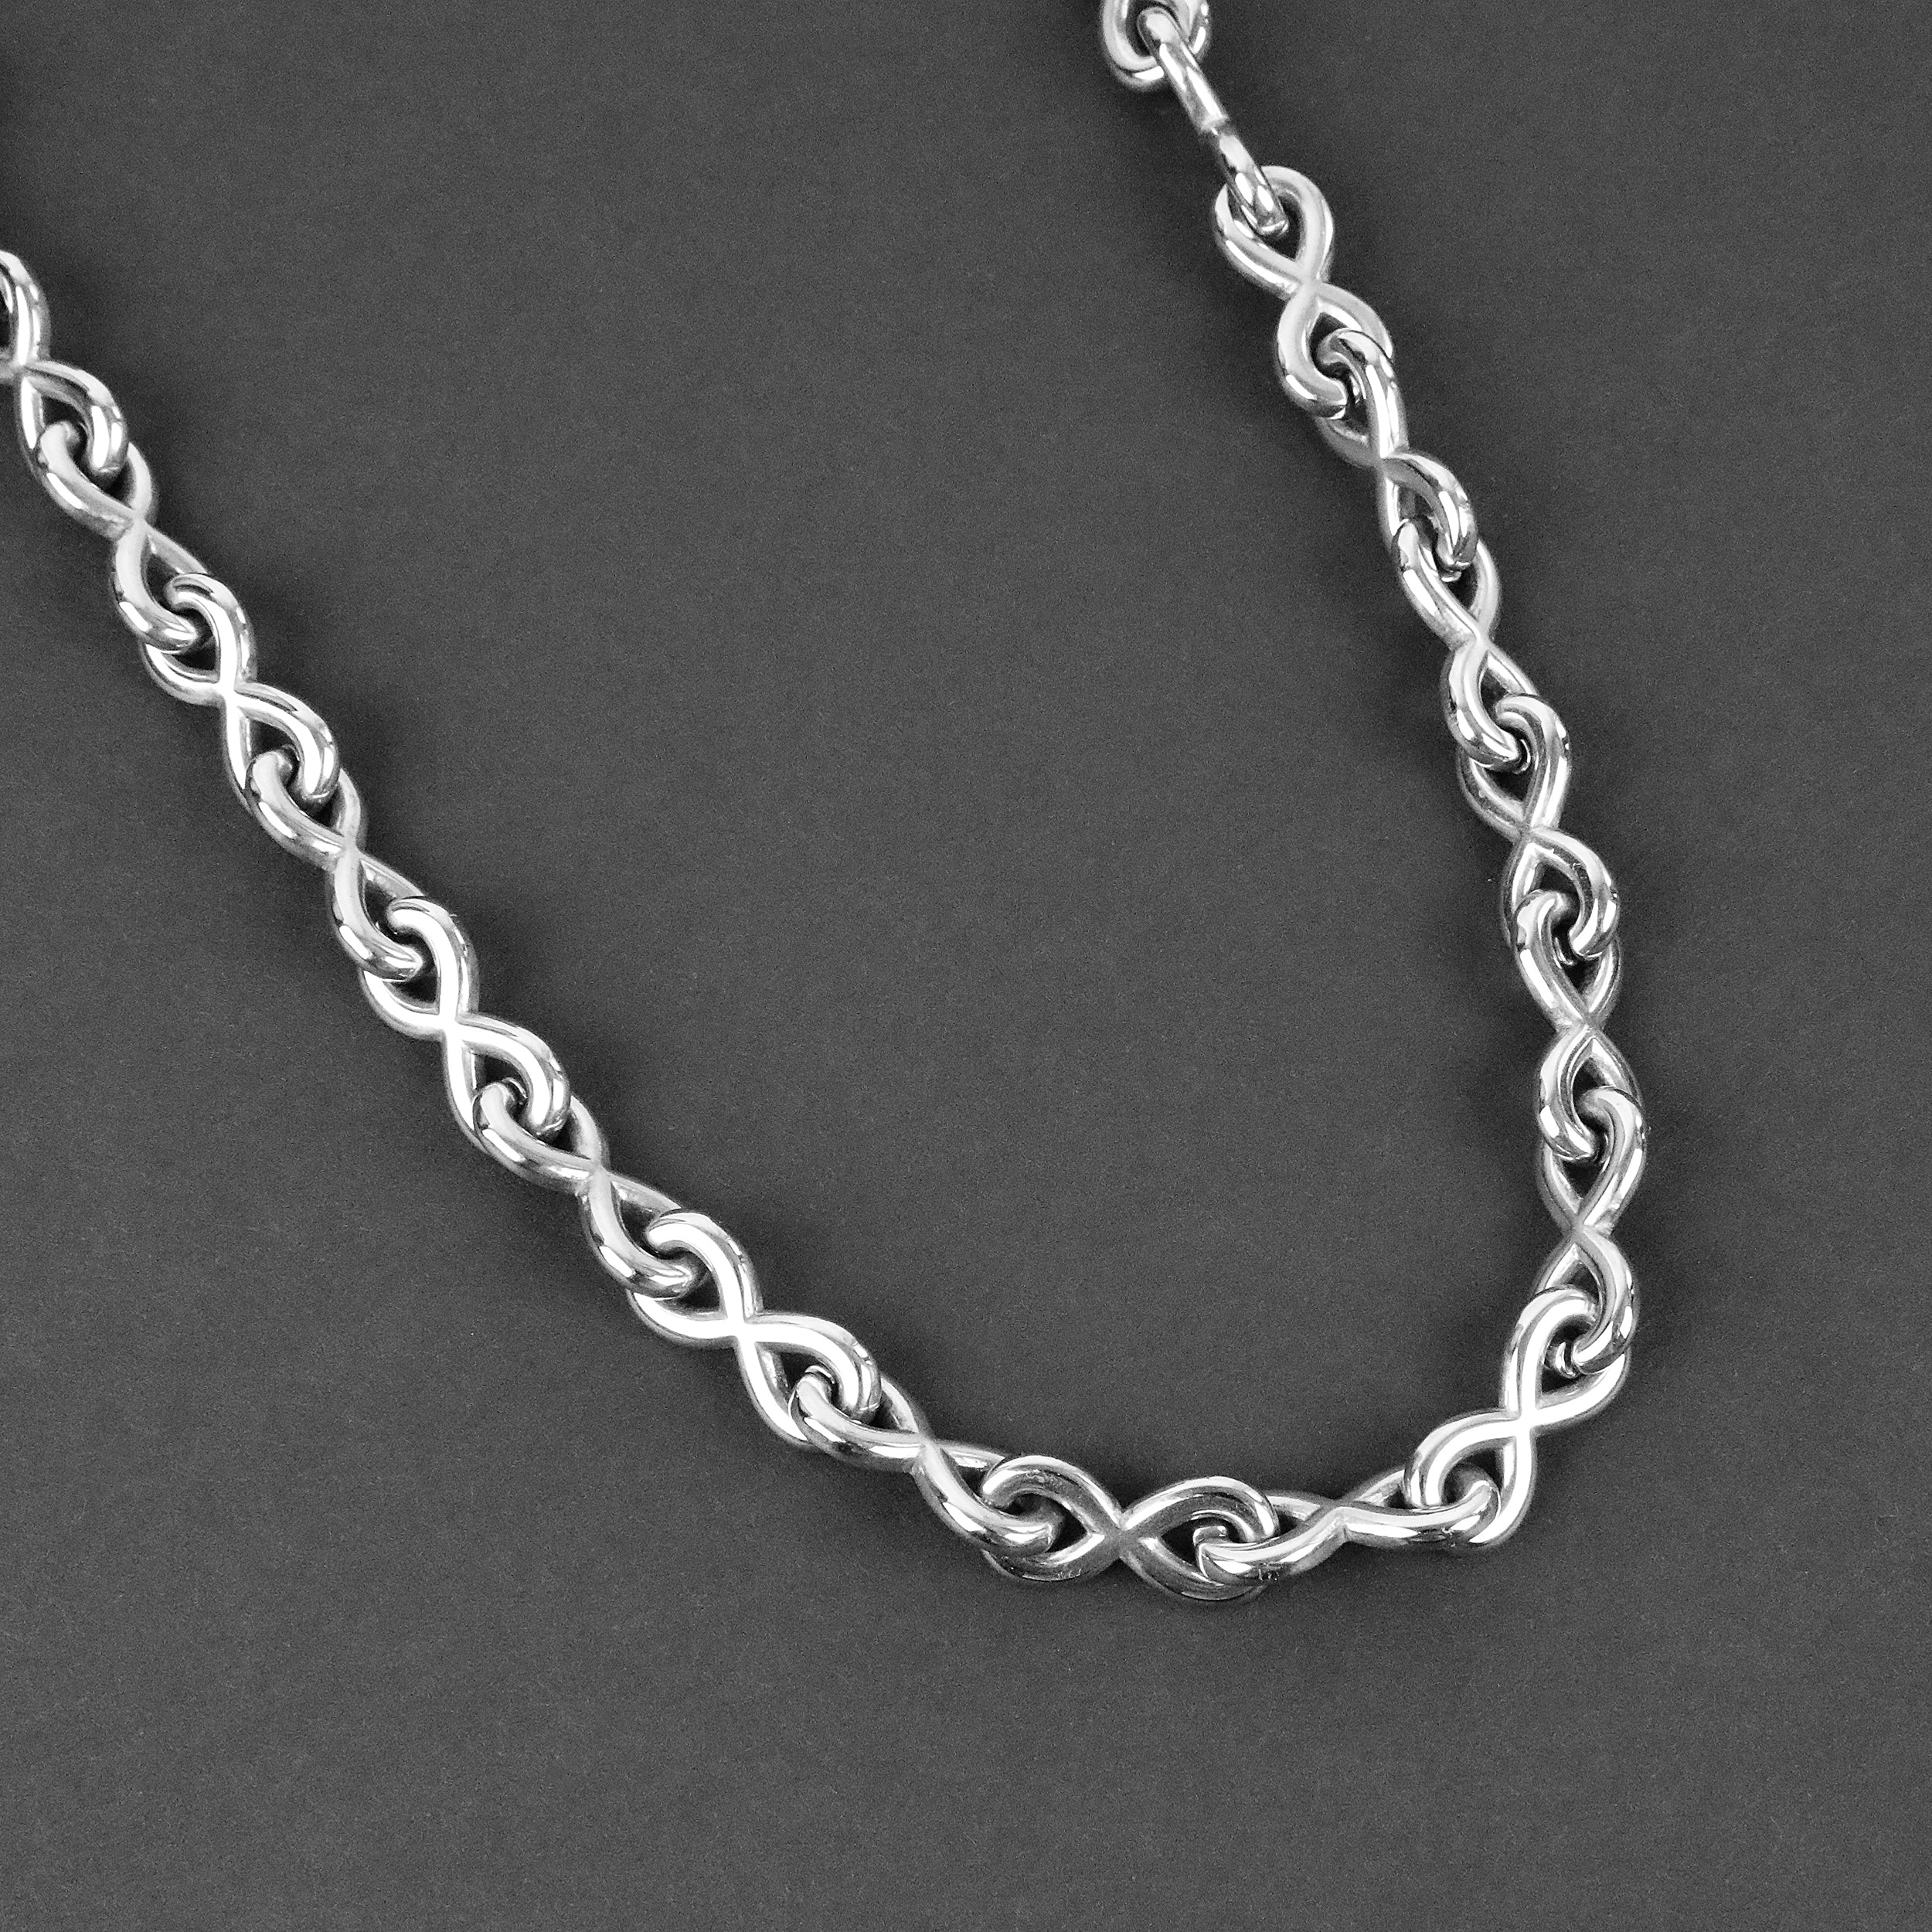 Infinity Chain Necklace - Silver 10mm